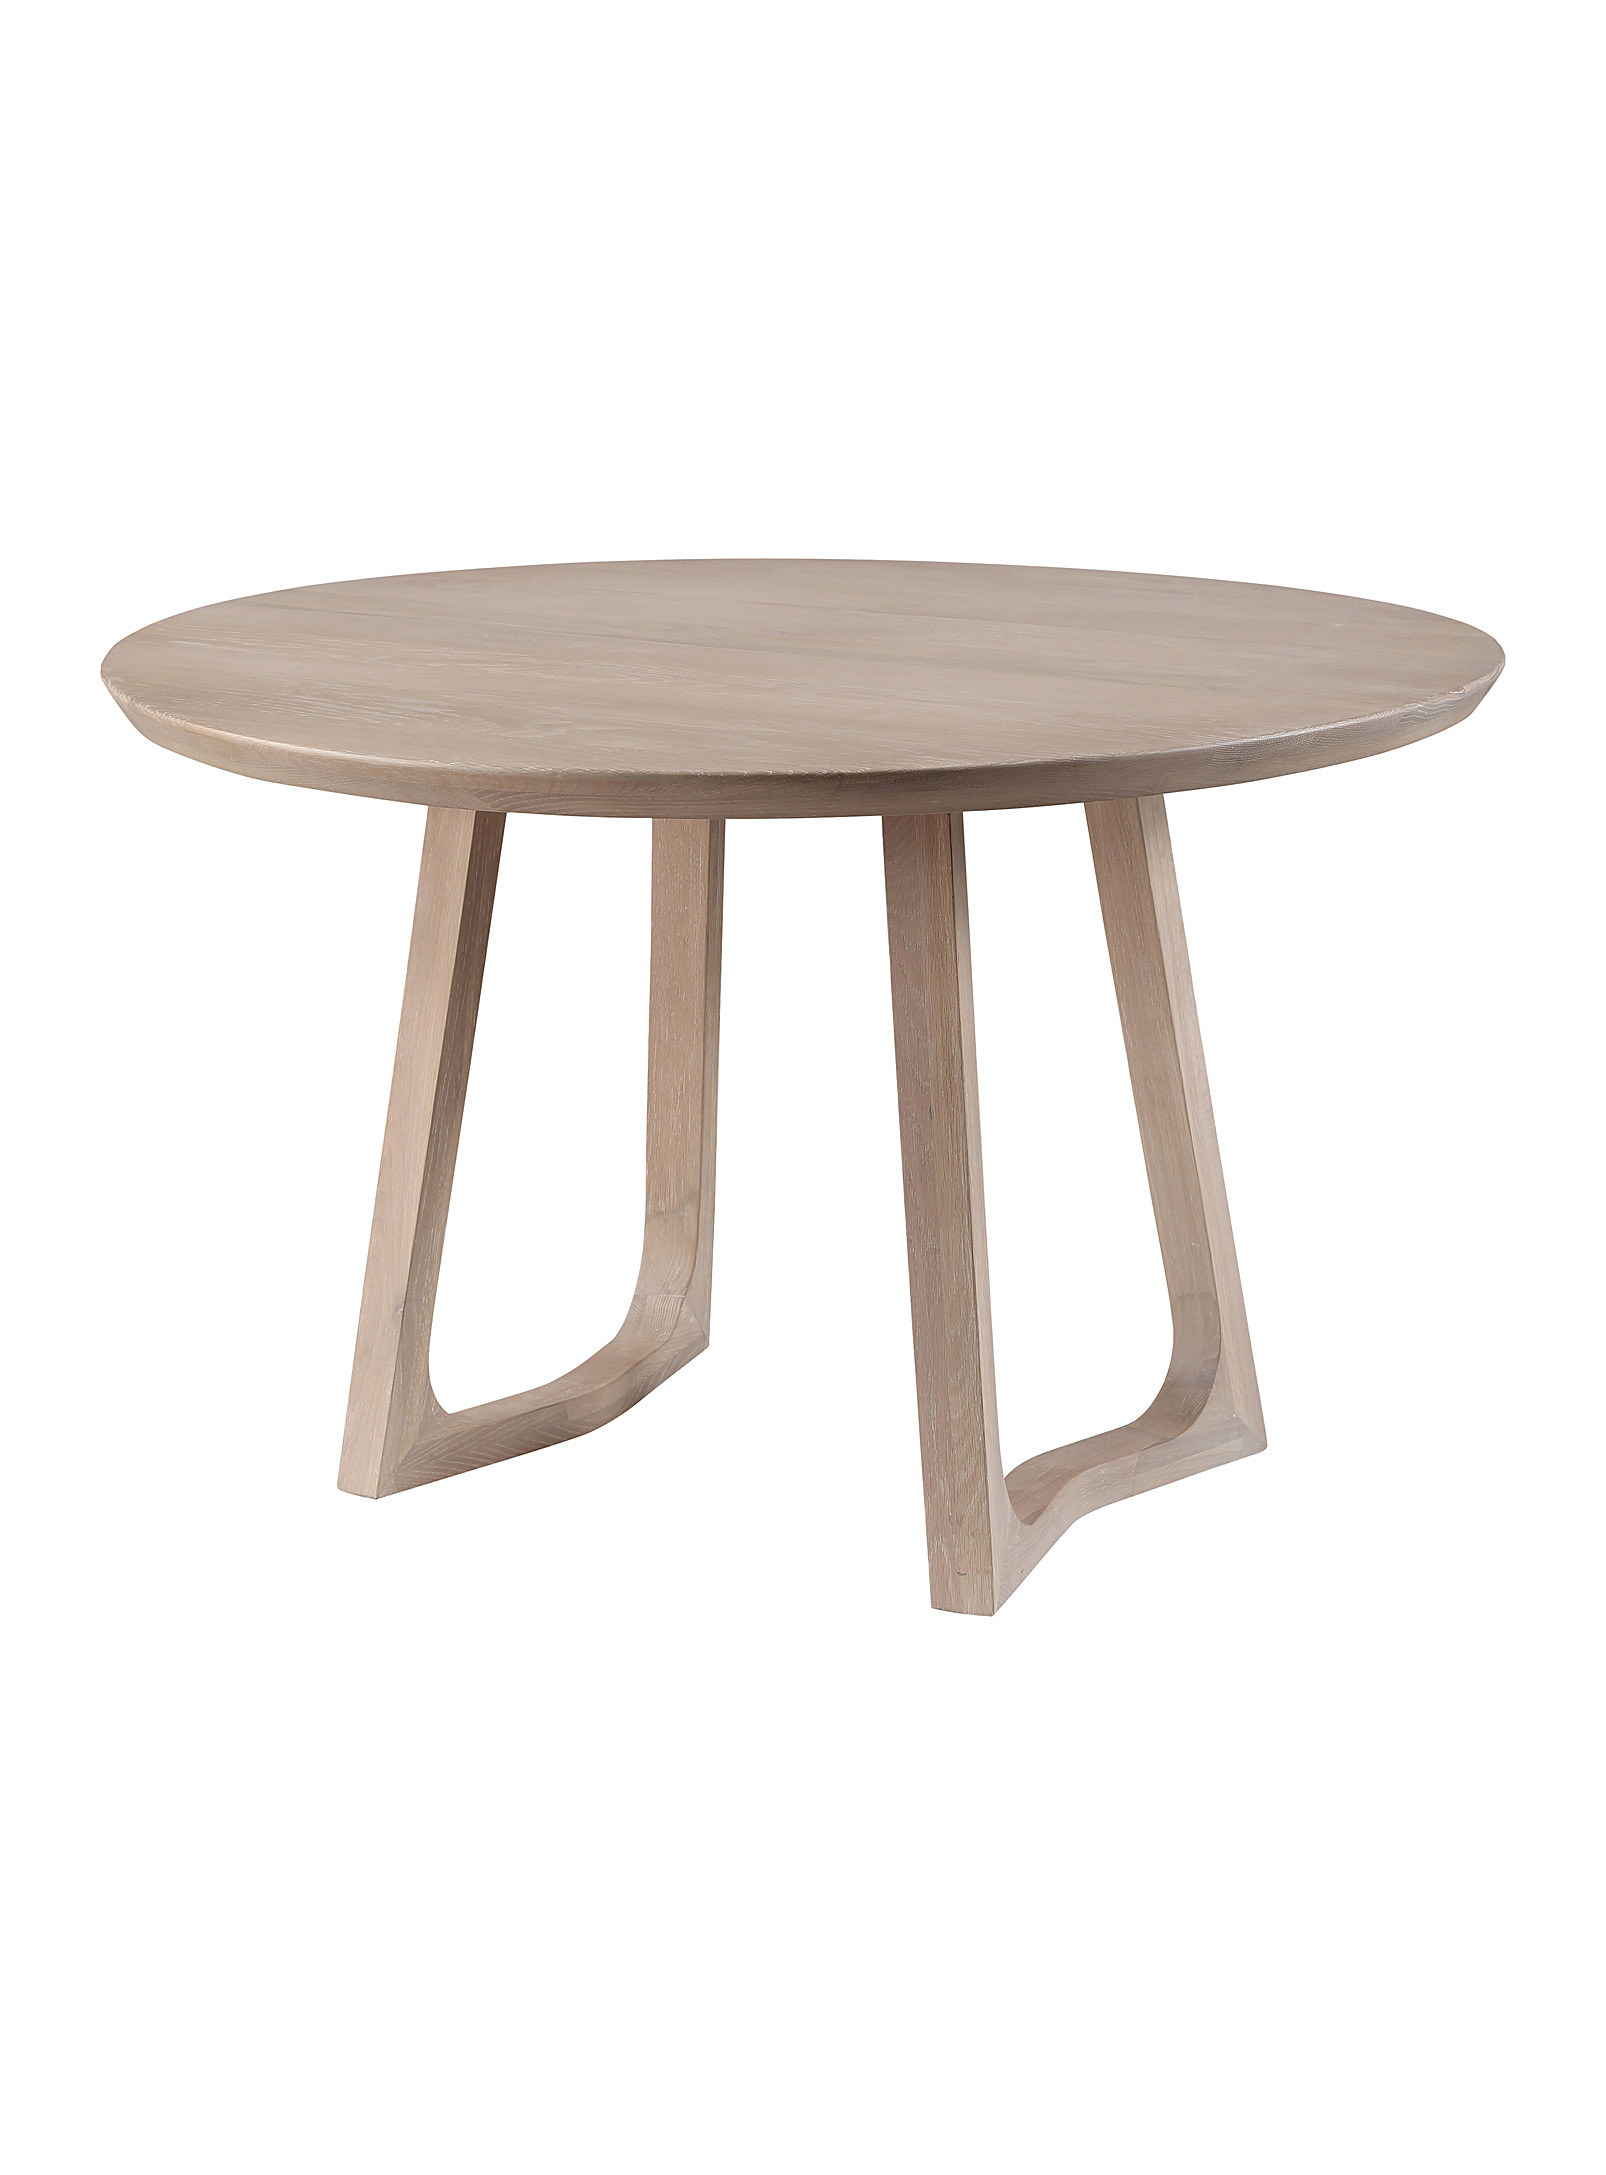 Moe's Home Collection - Silas oak wood round dining table